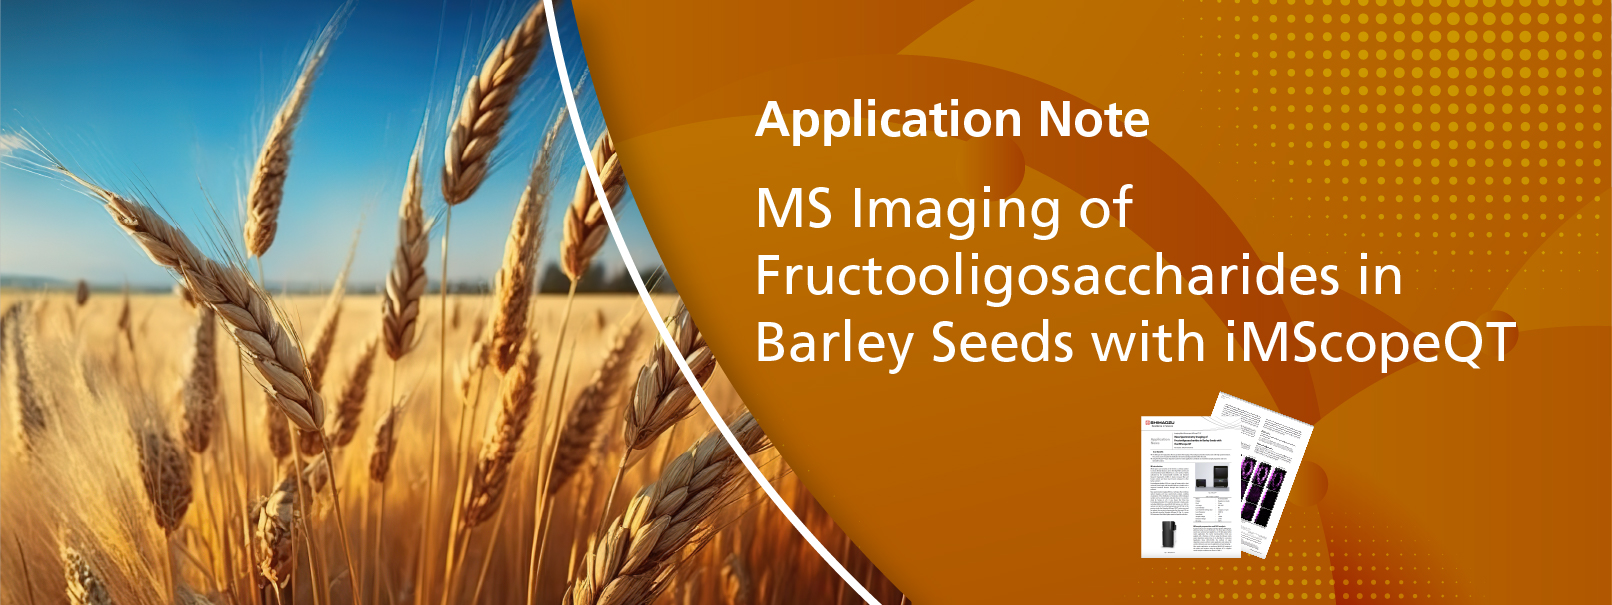 MS Imaging of Fructooligosaccharides in Barley Seeds with iMScopeQT